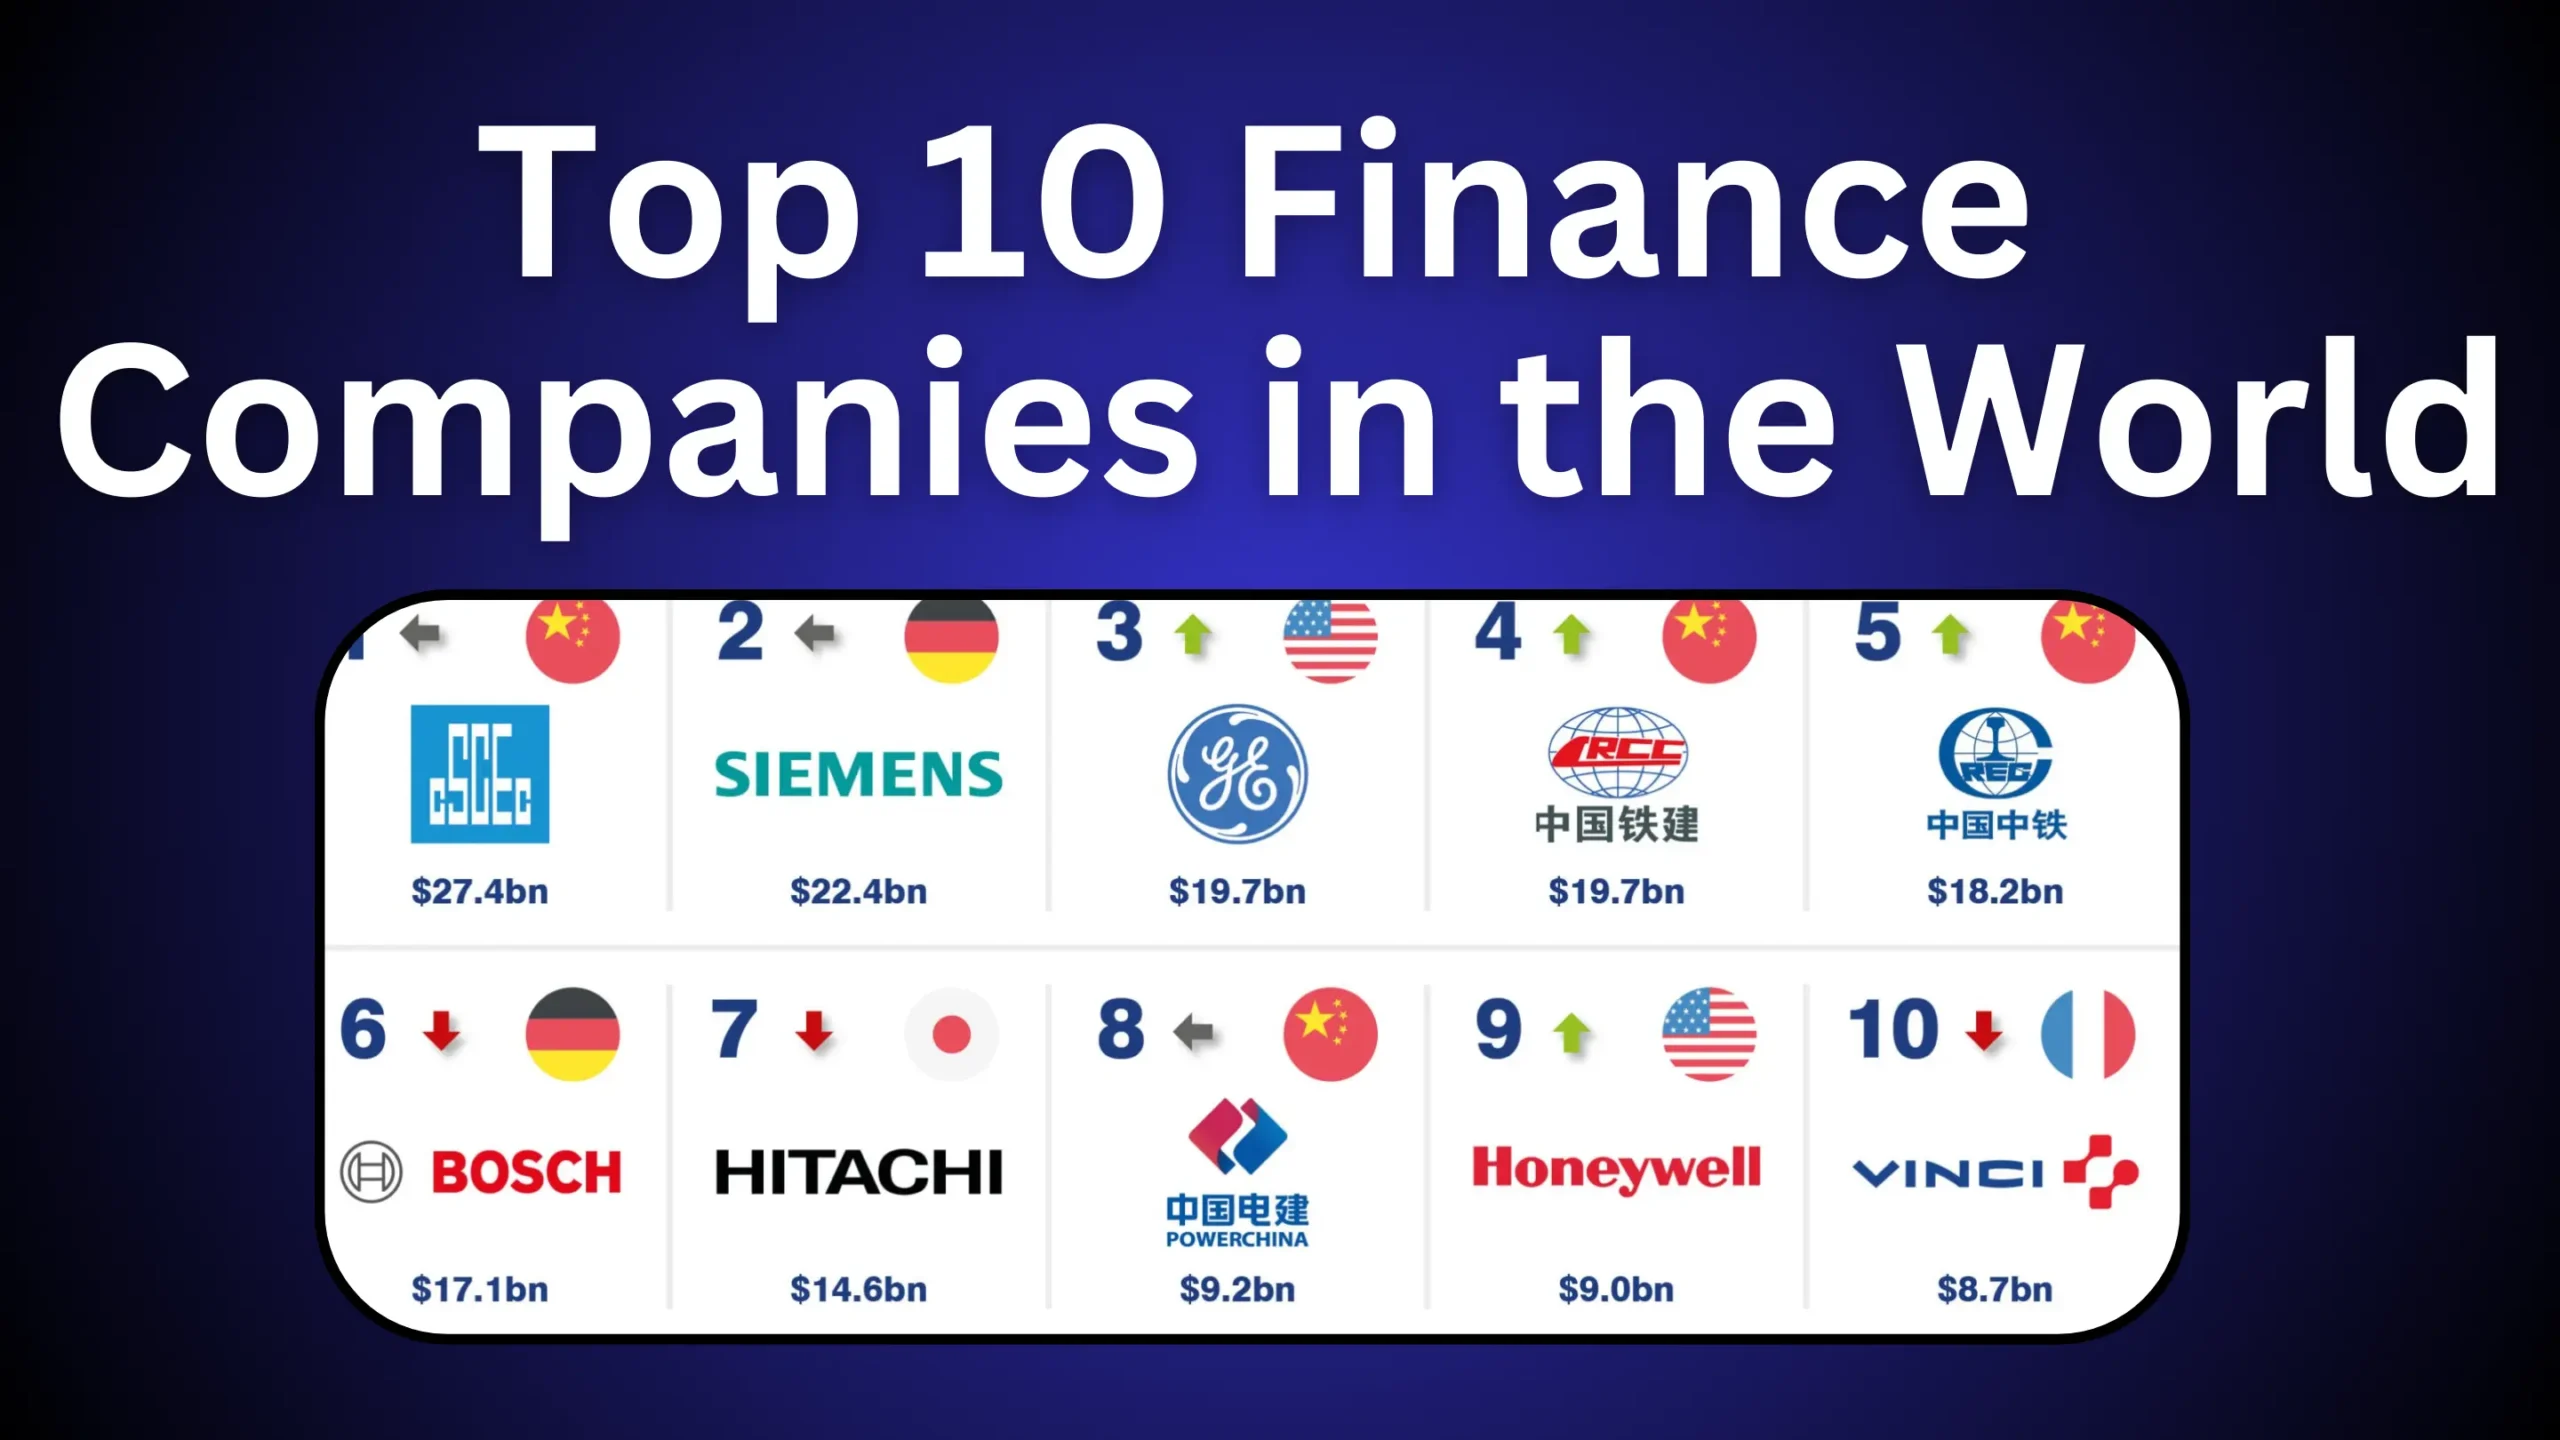 Top 10 Finance Companies in the World